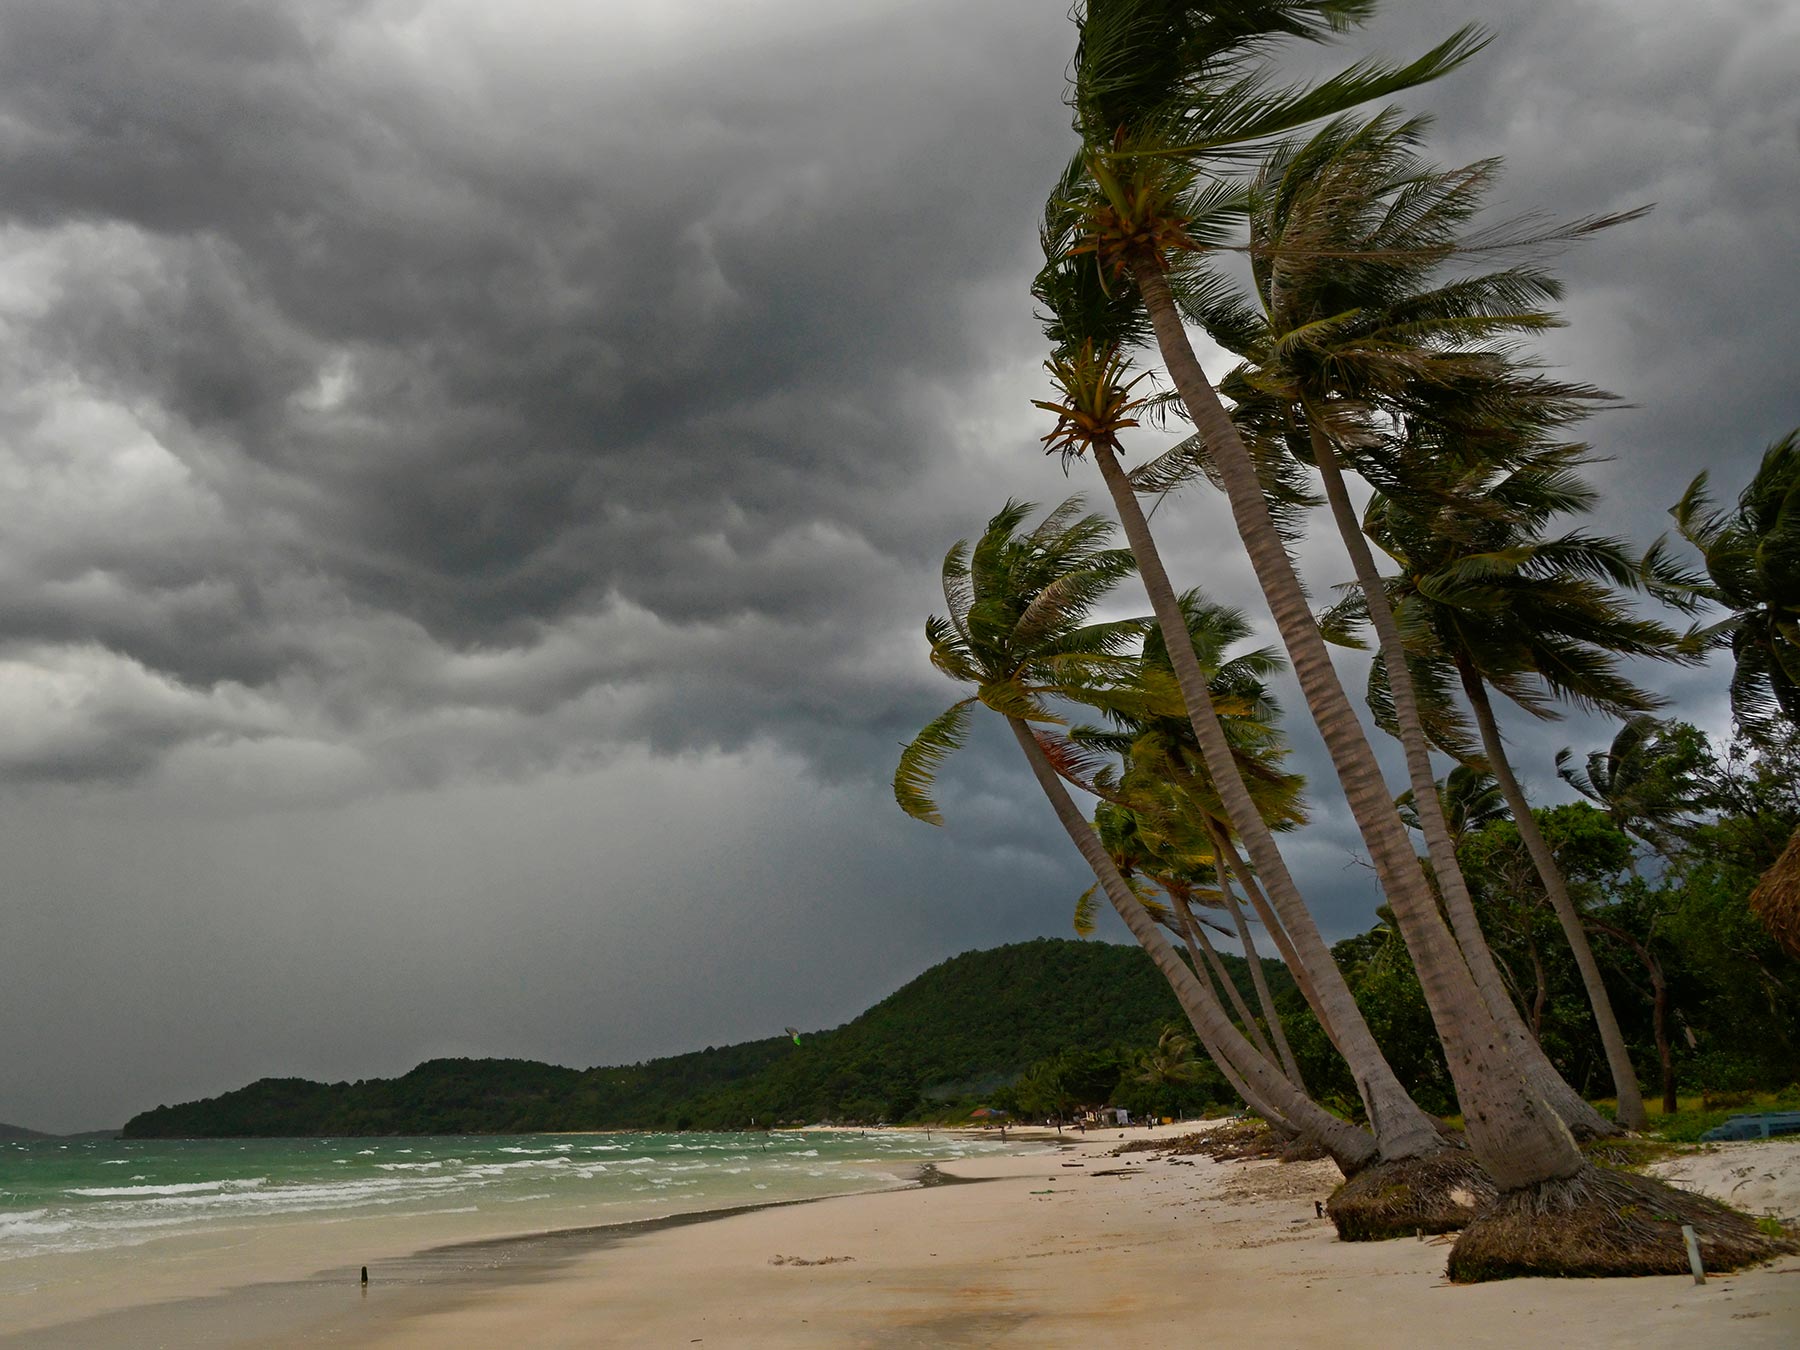 Palm trees on the beach blowing in the wind with storm clouds in the background.